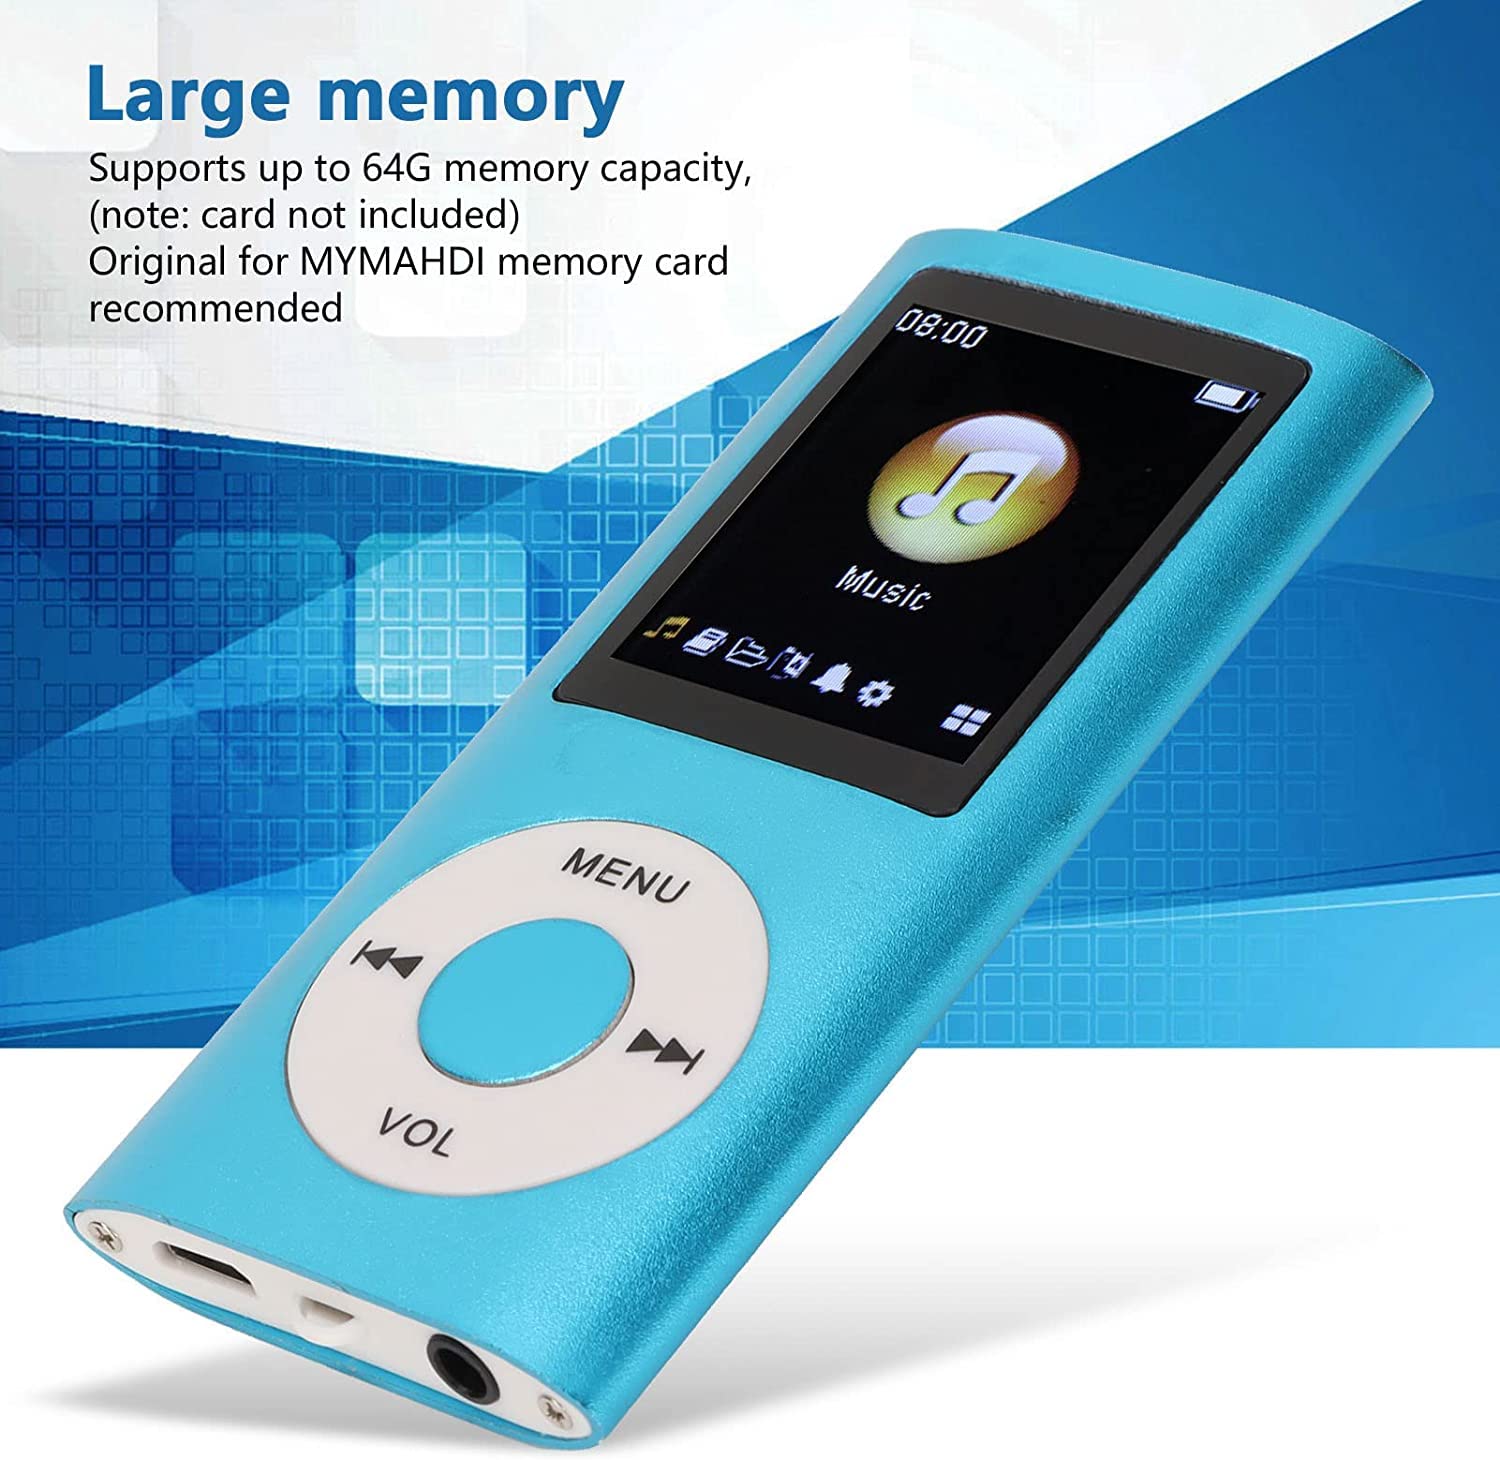 MP3 Player, Portable Lossless Sound Slim MP3 Music Player with Earphone, 1.8 Inch LCD Screen Digital Music Player, （Memory Card Not Included）(Black)